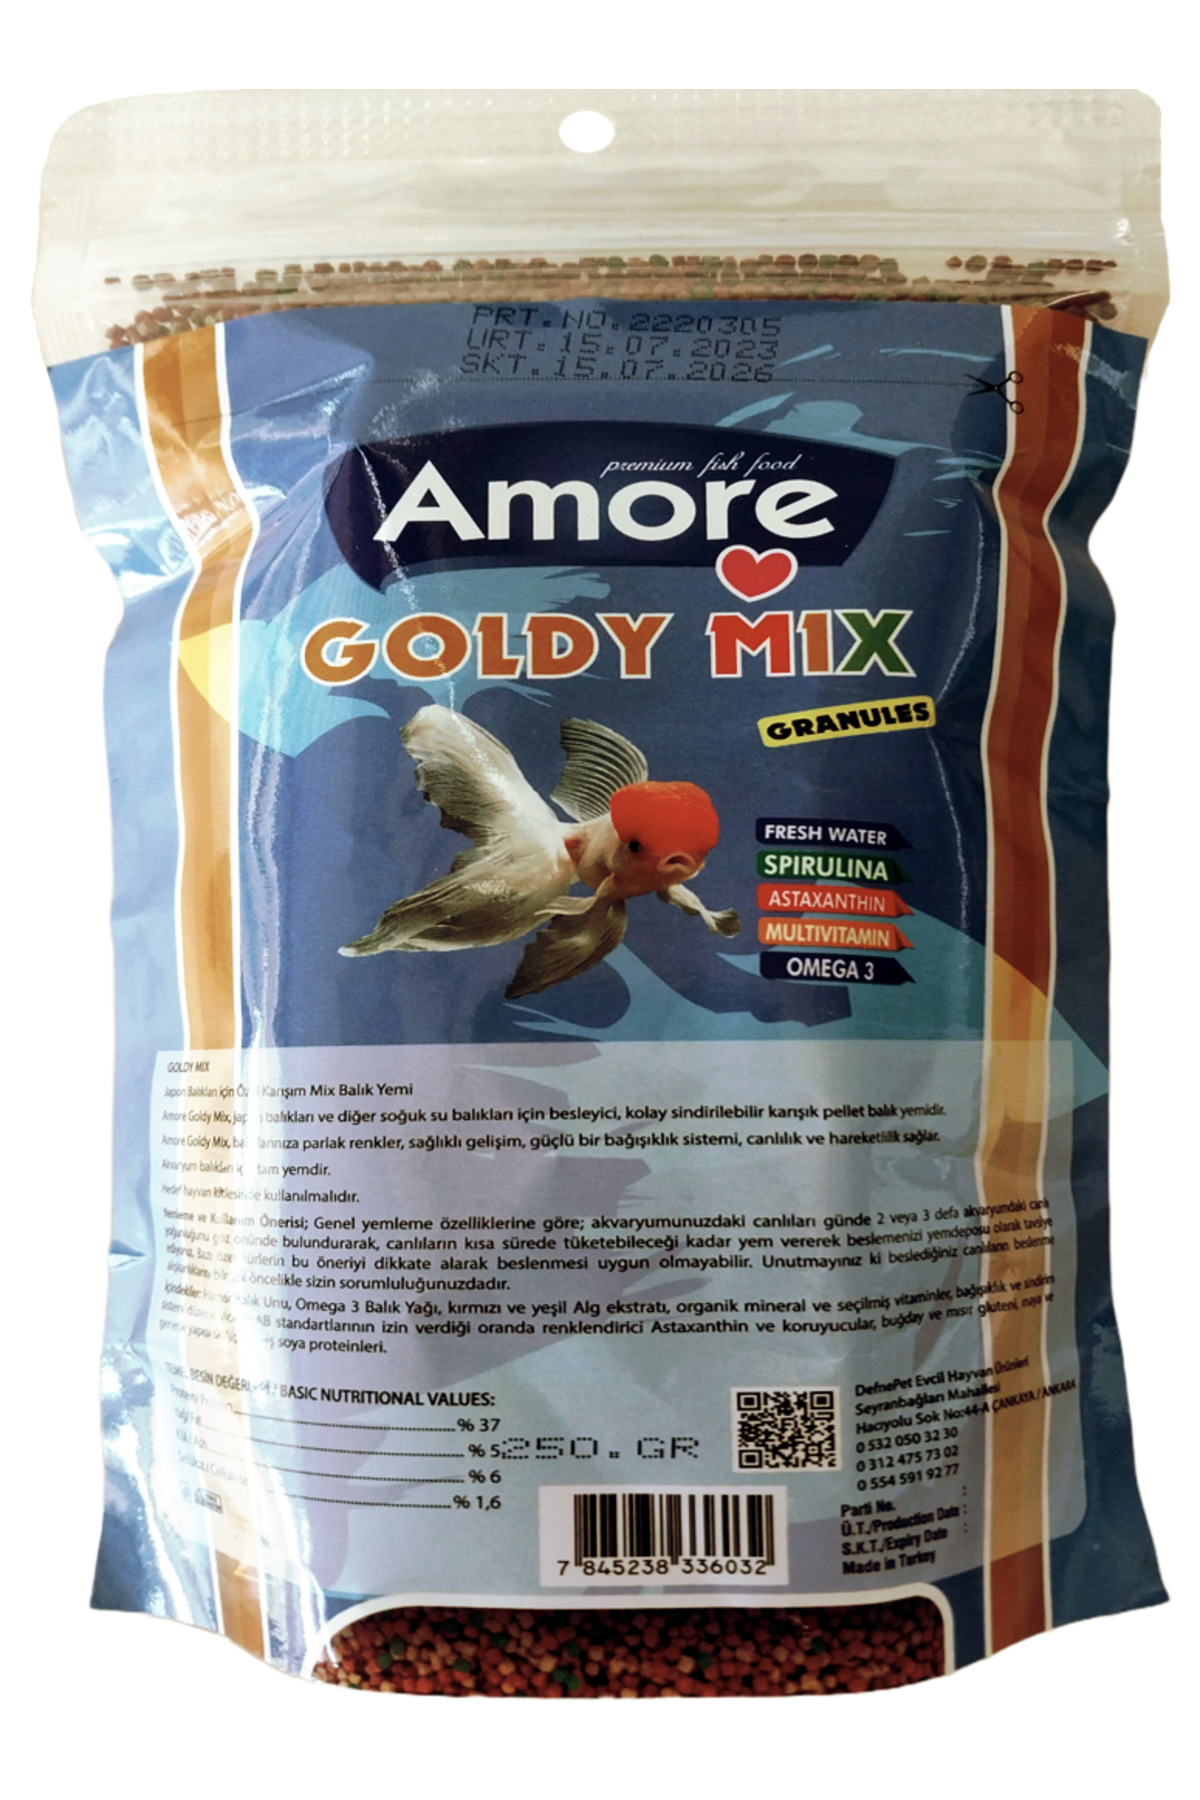 Amore Goldy Mix %37 Protein 250 gr Easy-Fill-Pack ve 1000 ml Box AHM Gold Mix Japon Balik Yemi